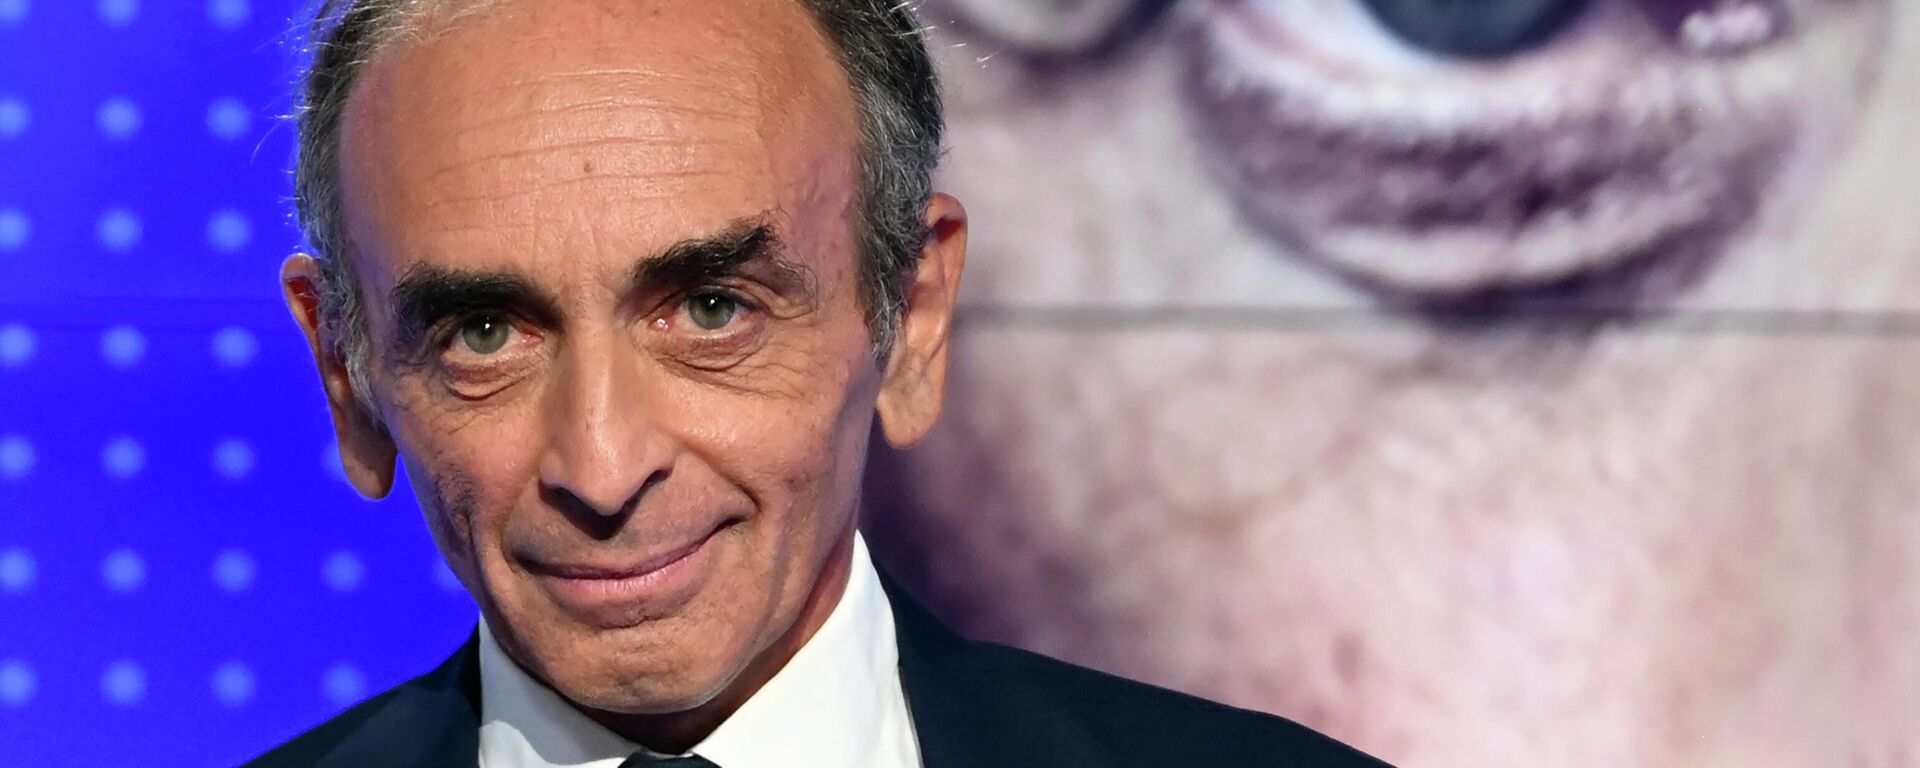 FILE - In this Sept.23, 2021 file photo, French far-right media pundit Eric Zemmour poses prior to a televised debate between French far-left leader, Jean-Luc Melenchon in Paris - Sputnik International, 1920, 05.12.2021